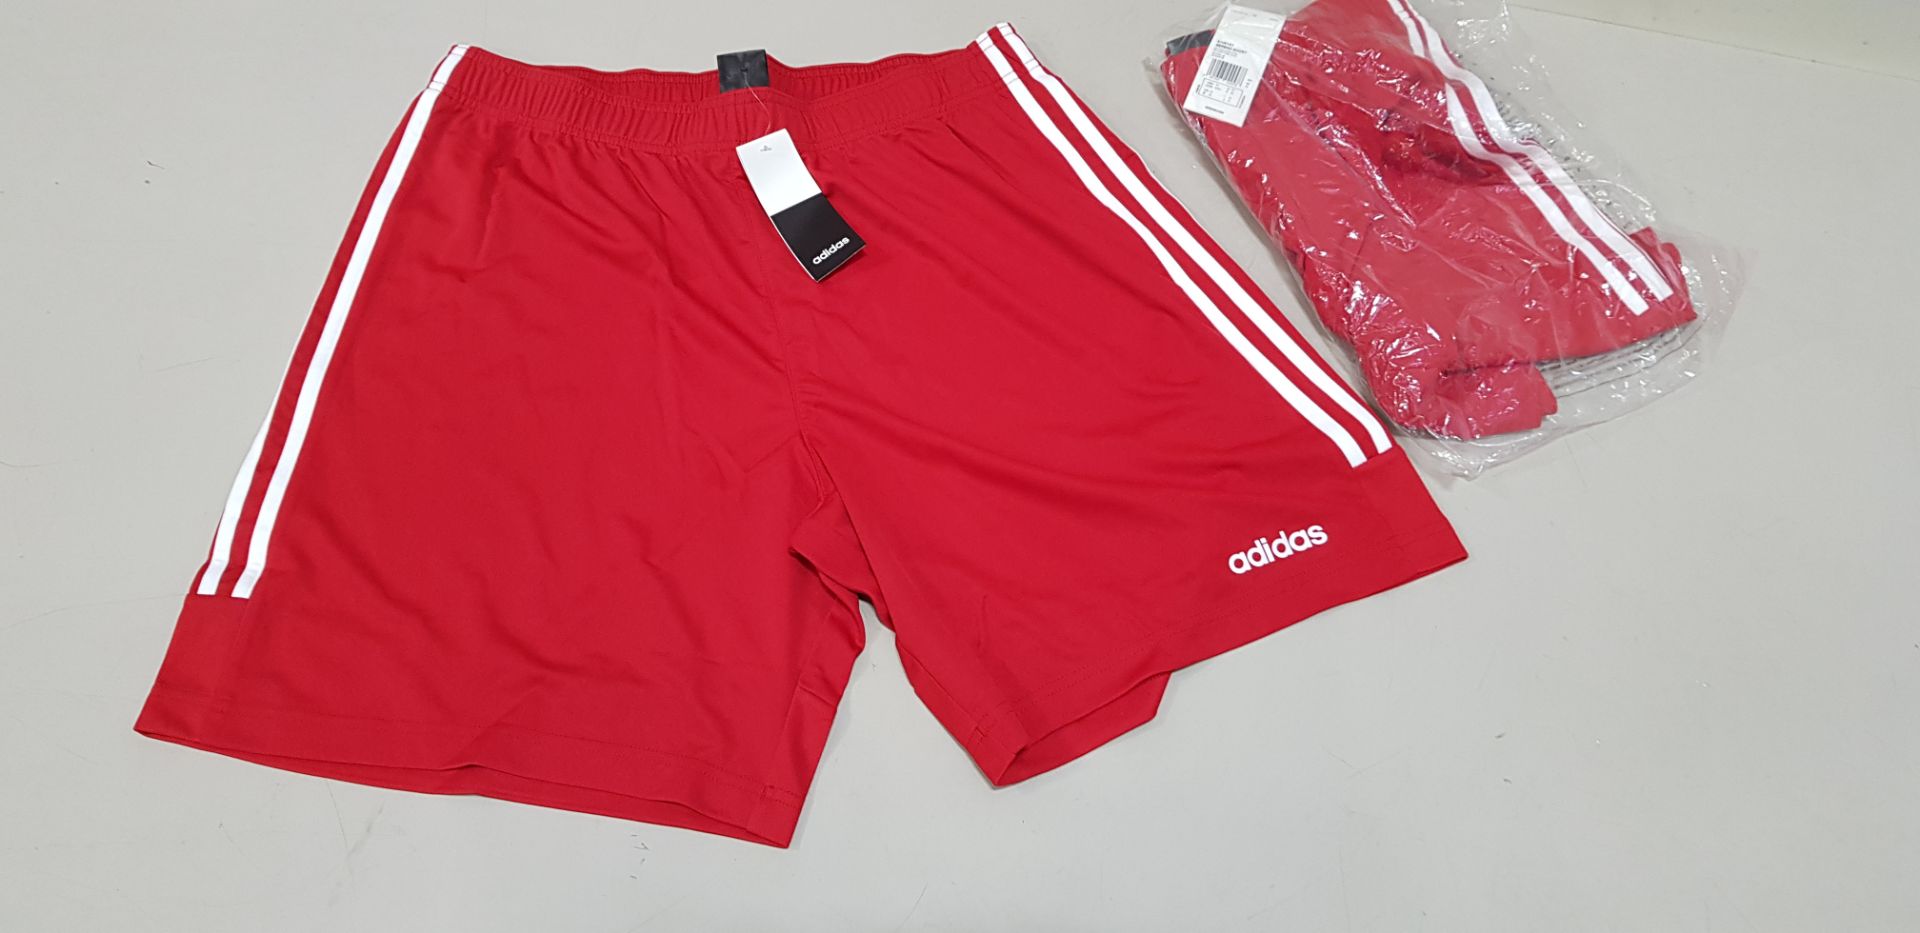 27 X BRAND NEW ADIDAS RED SERENO 3 STRIPE SHORTS IN SIZE UK SMALL